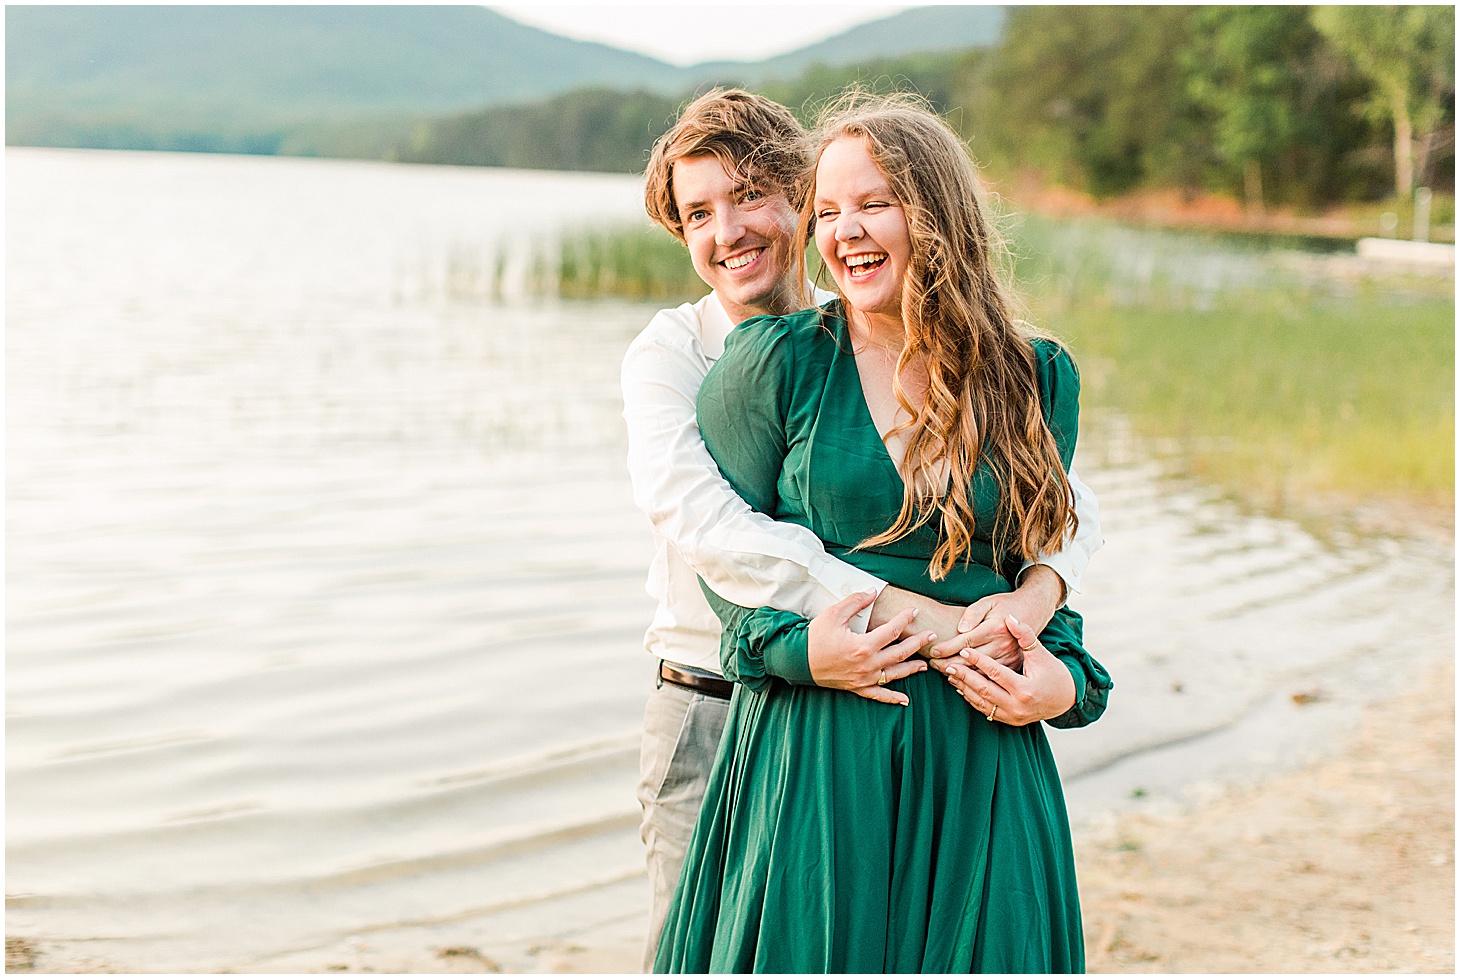 carvinscoveengagementsession_roanokeengagementsession_carvinscove_virginiawedding_virginiaweddingphotographer_vaweddingphotographer_photo_0062.jpg